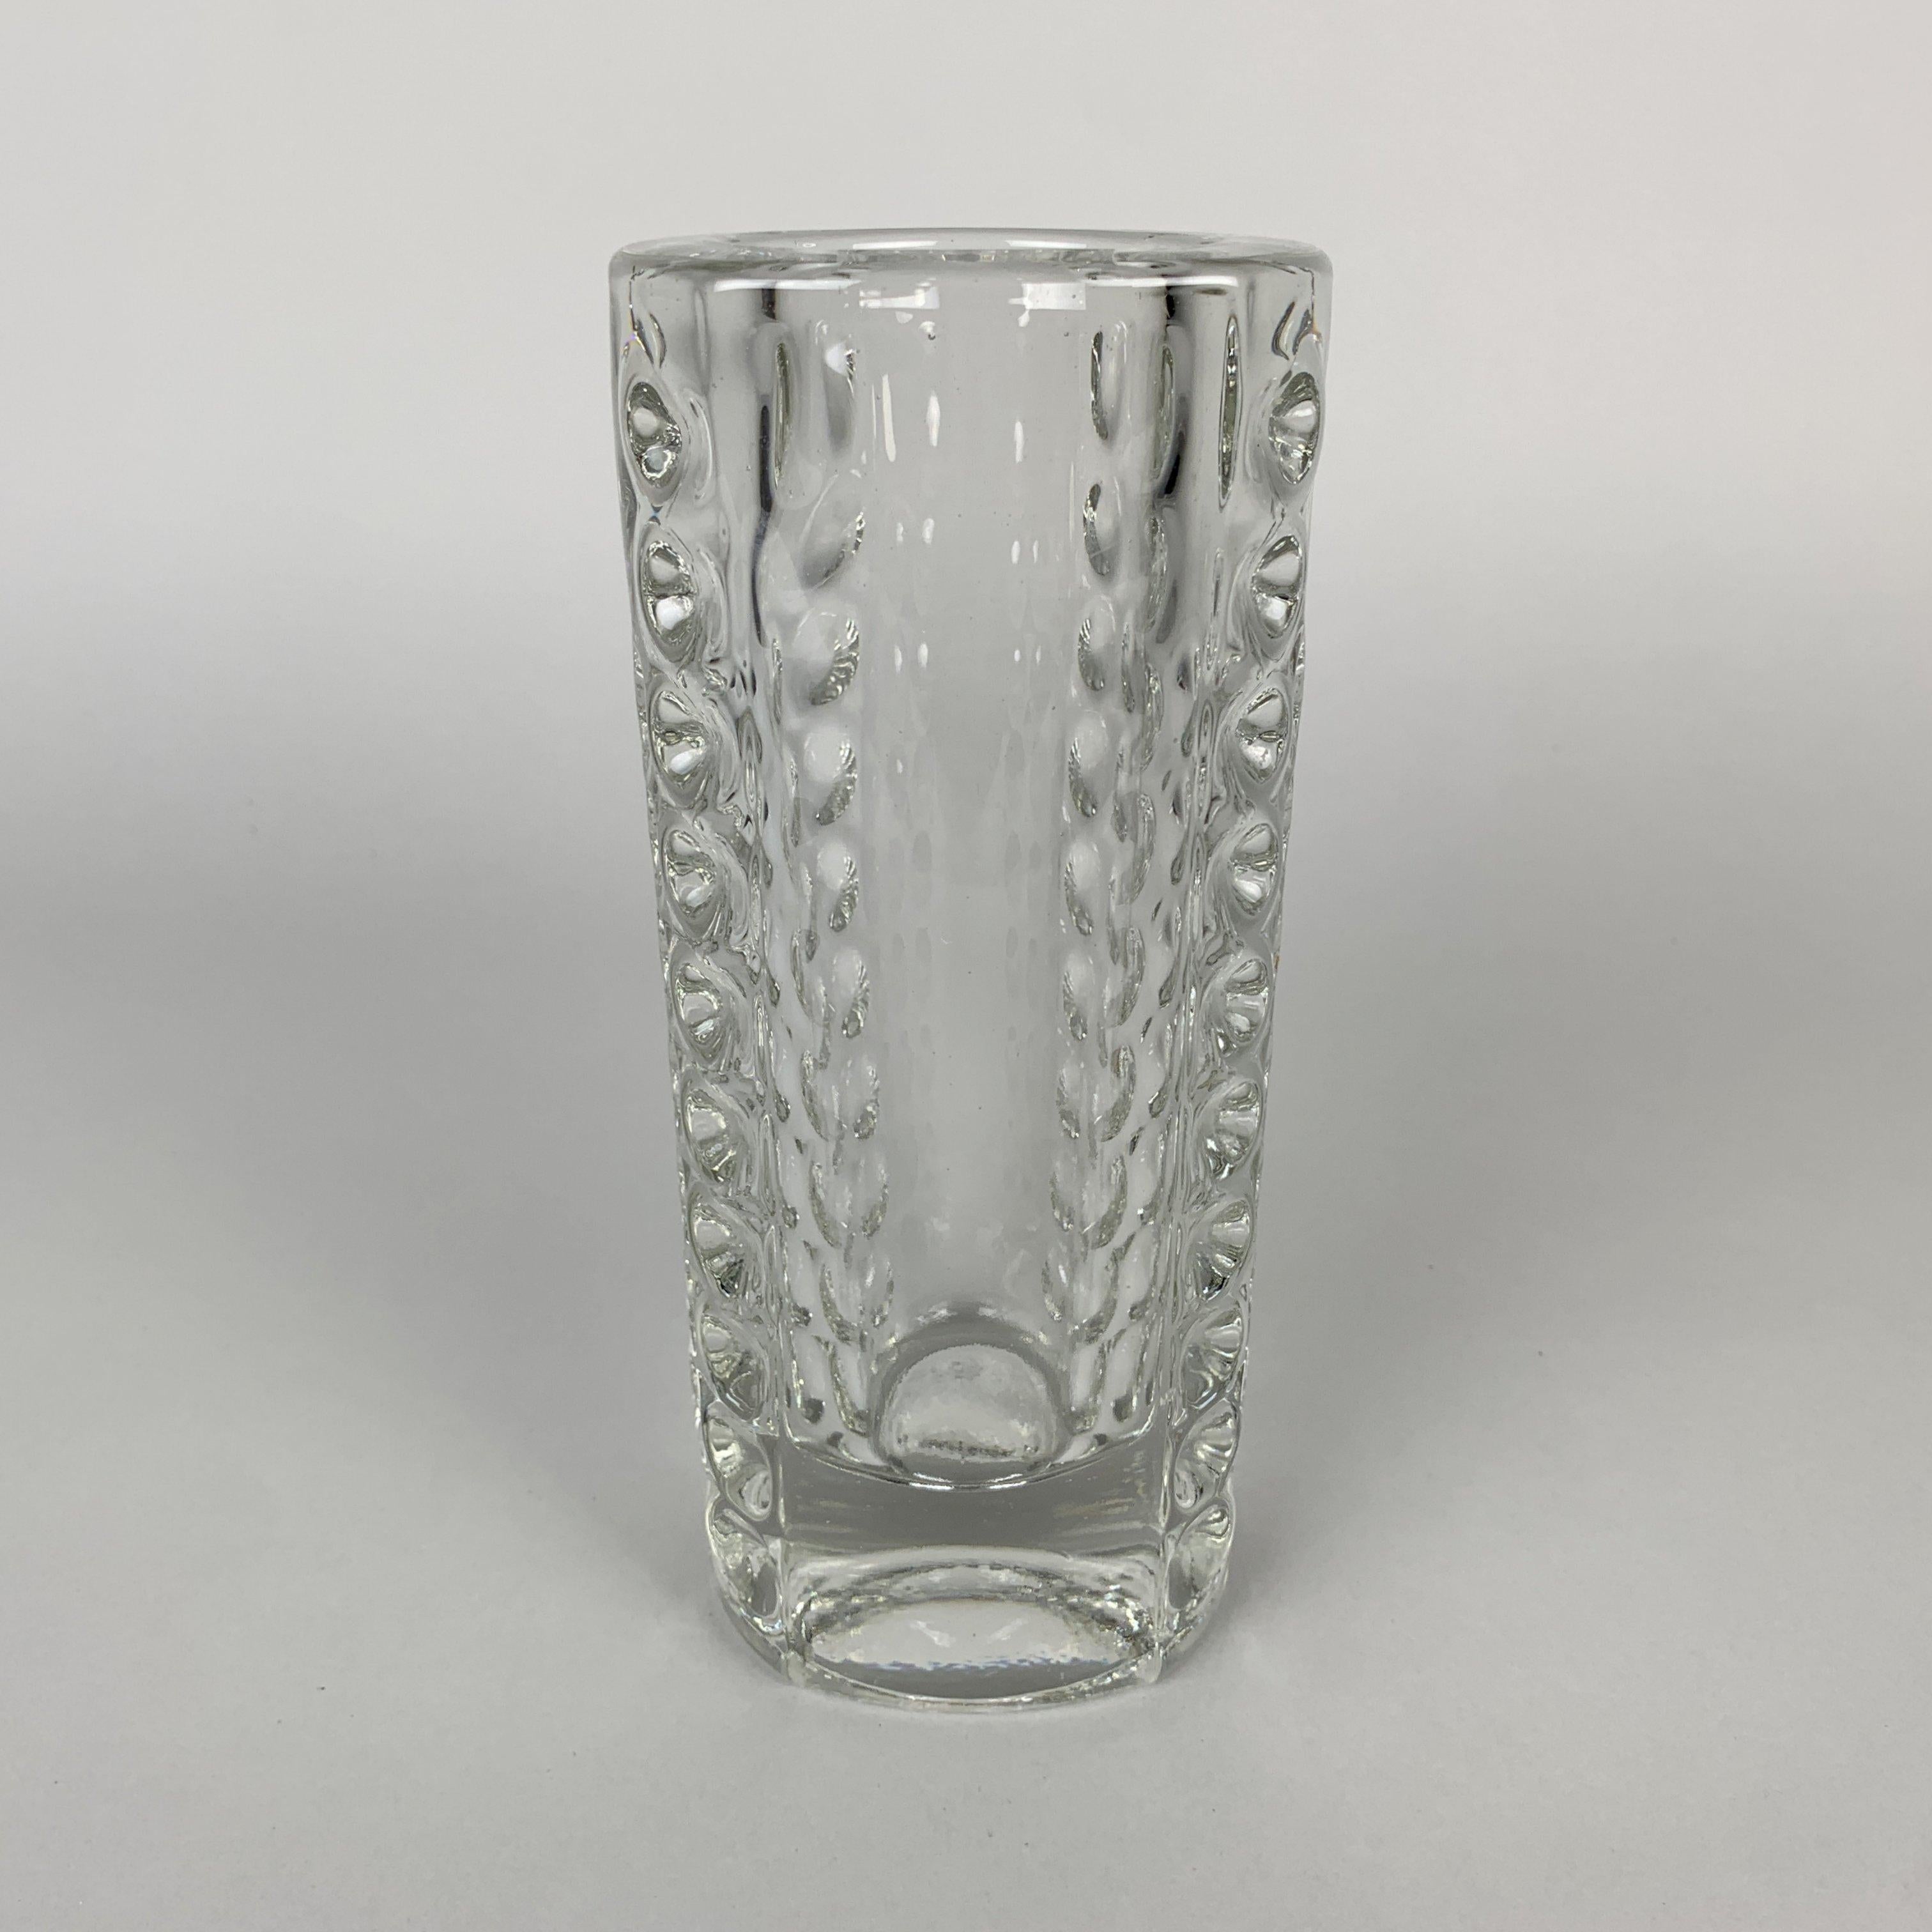 Heavy pressed glass vase designed by Rudol Jurnikl in 1962 and produced by Rudolfova Hut Glassworks in the city of Dubi in Czechoslovakia.